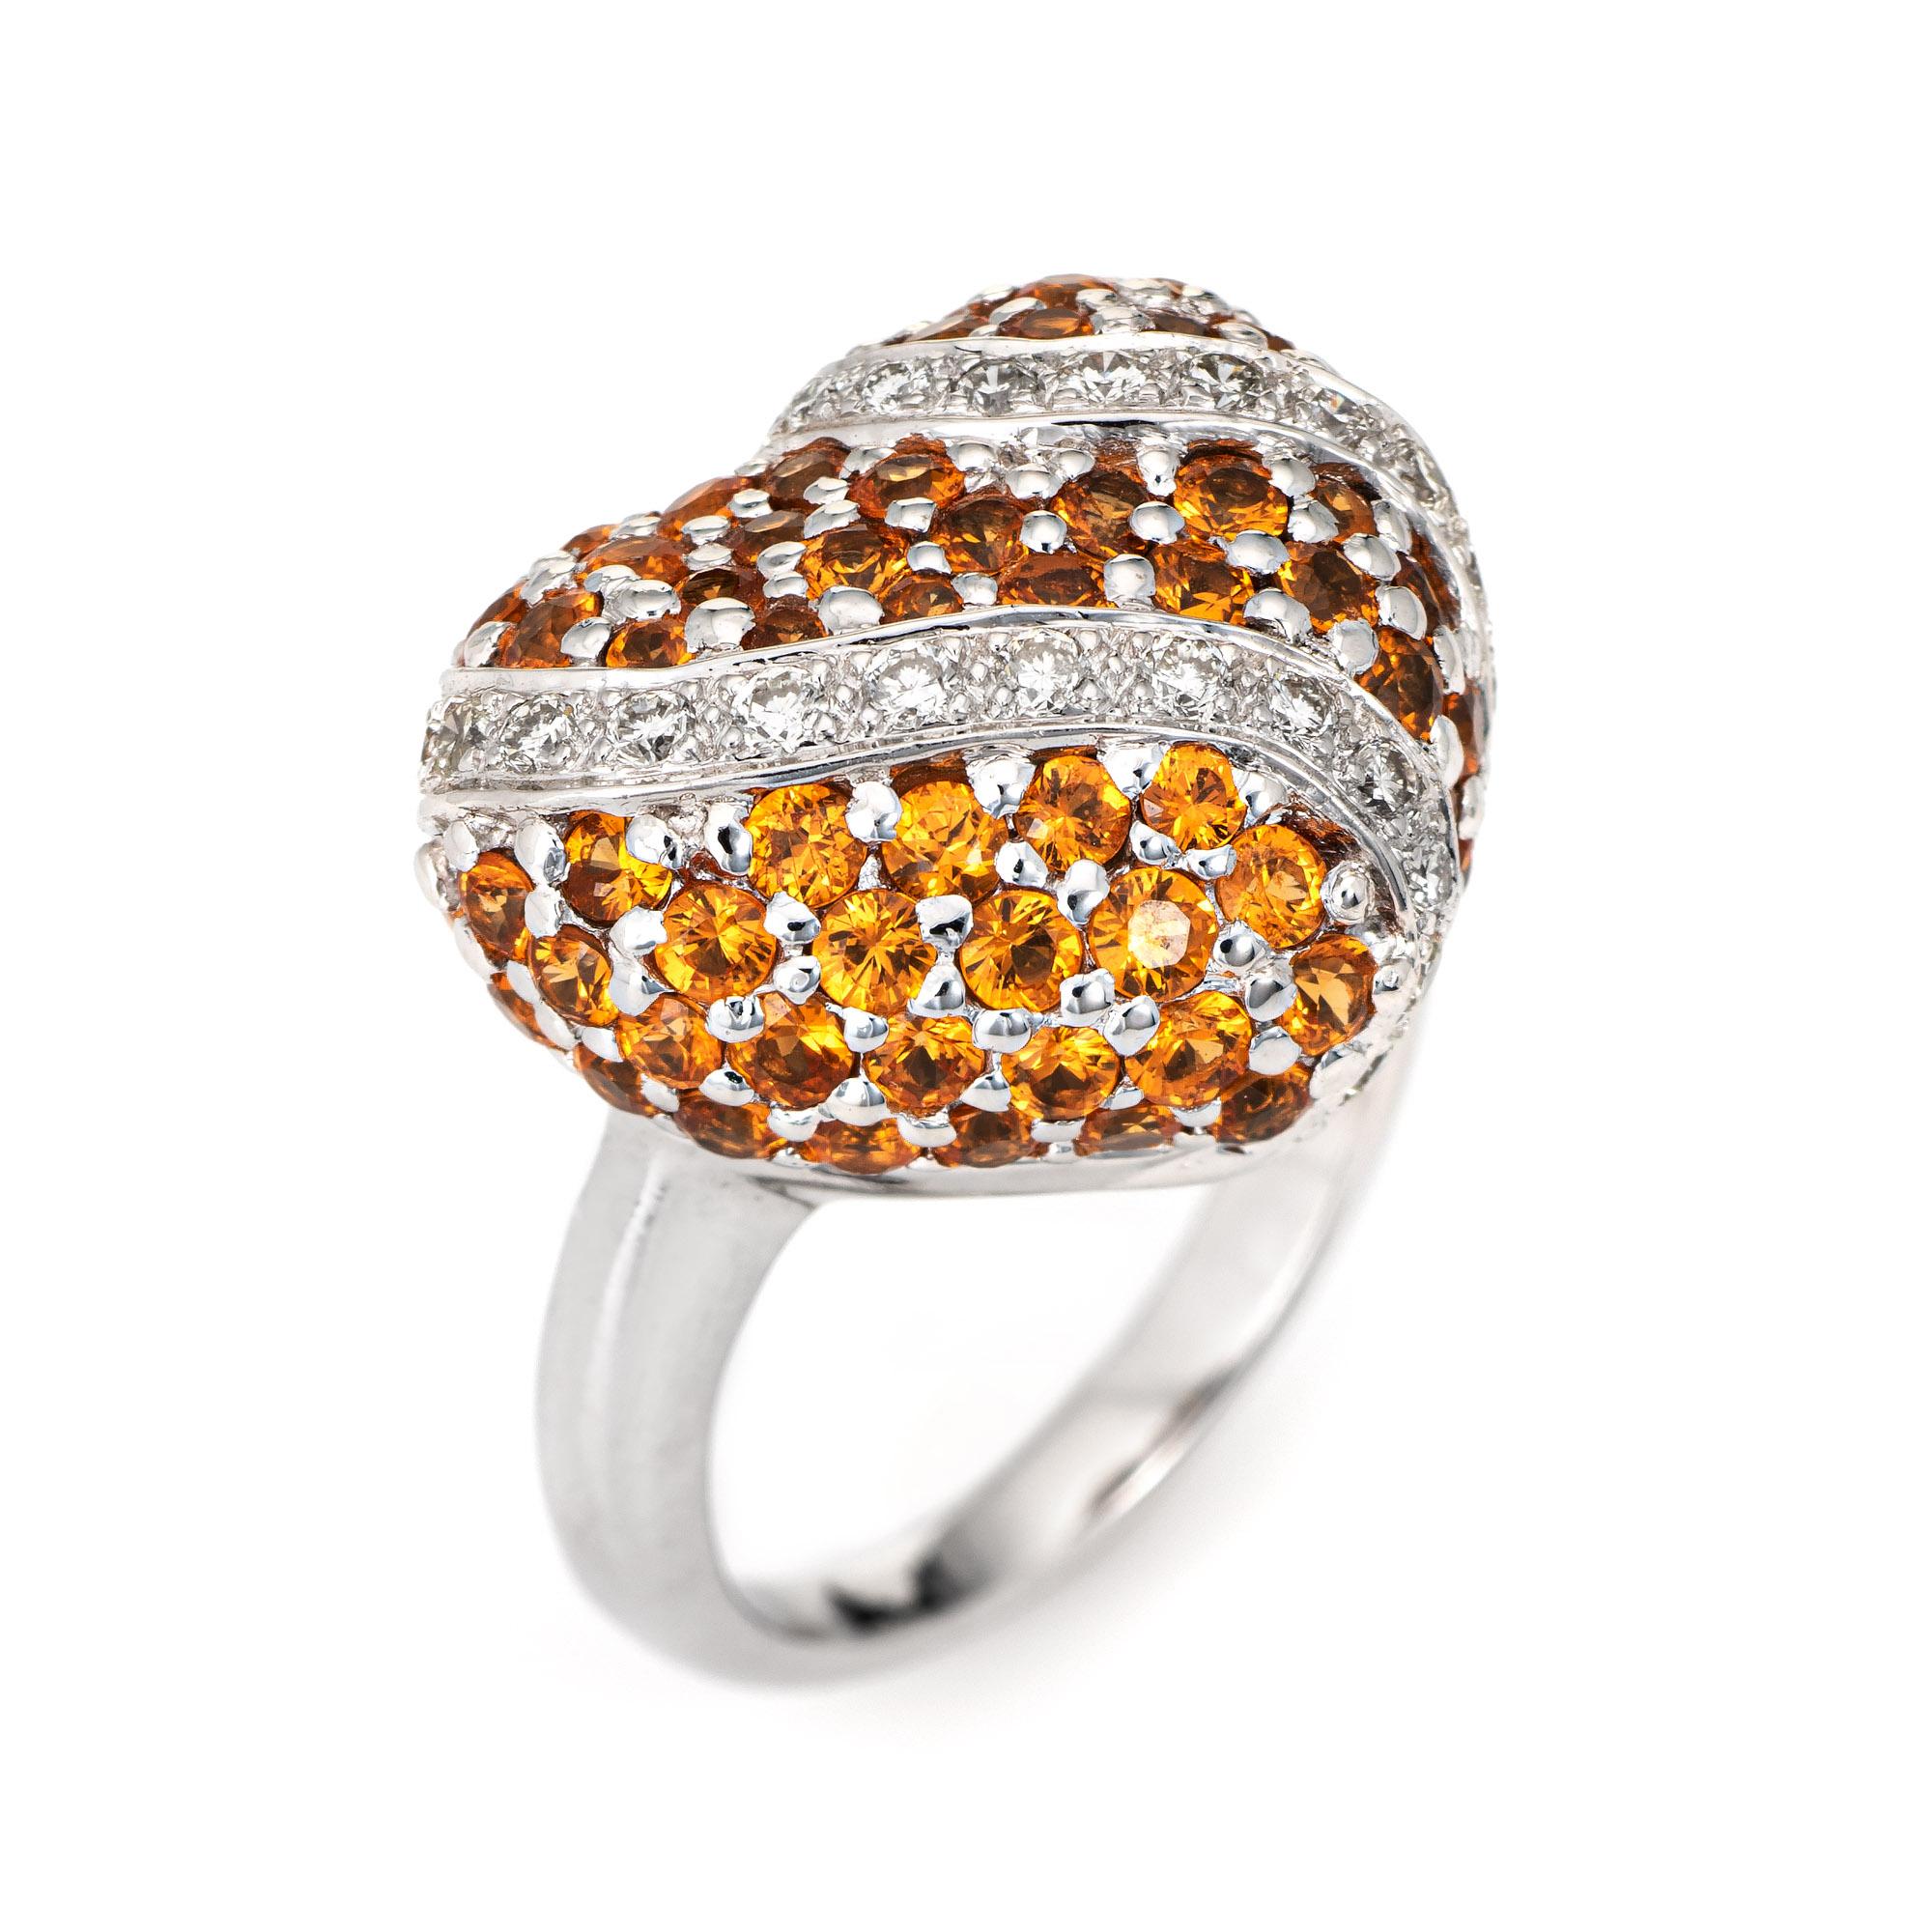 Stylish vintage Spessartite Orange Garnet heart cocktail ring crafted in 18 karat white gold. 

Spessartite orange garnets totaling an estimated 2.50 carats and a total of 0.28 carats of diamonds adorn the mount (estimated at G-H color and VS2